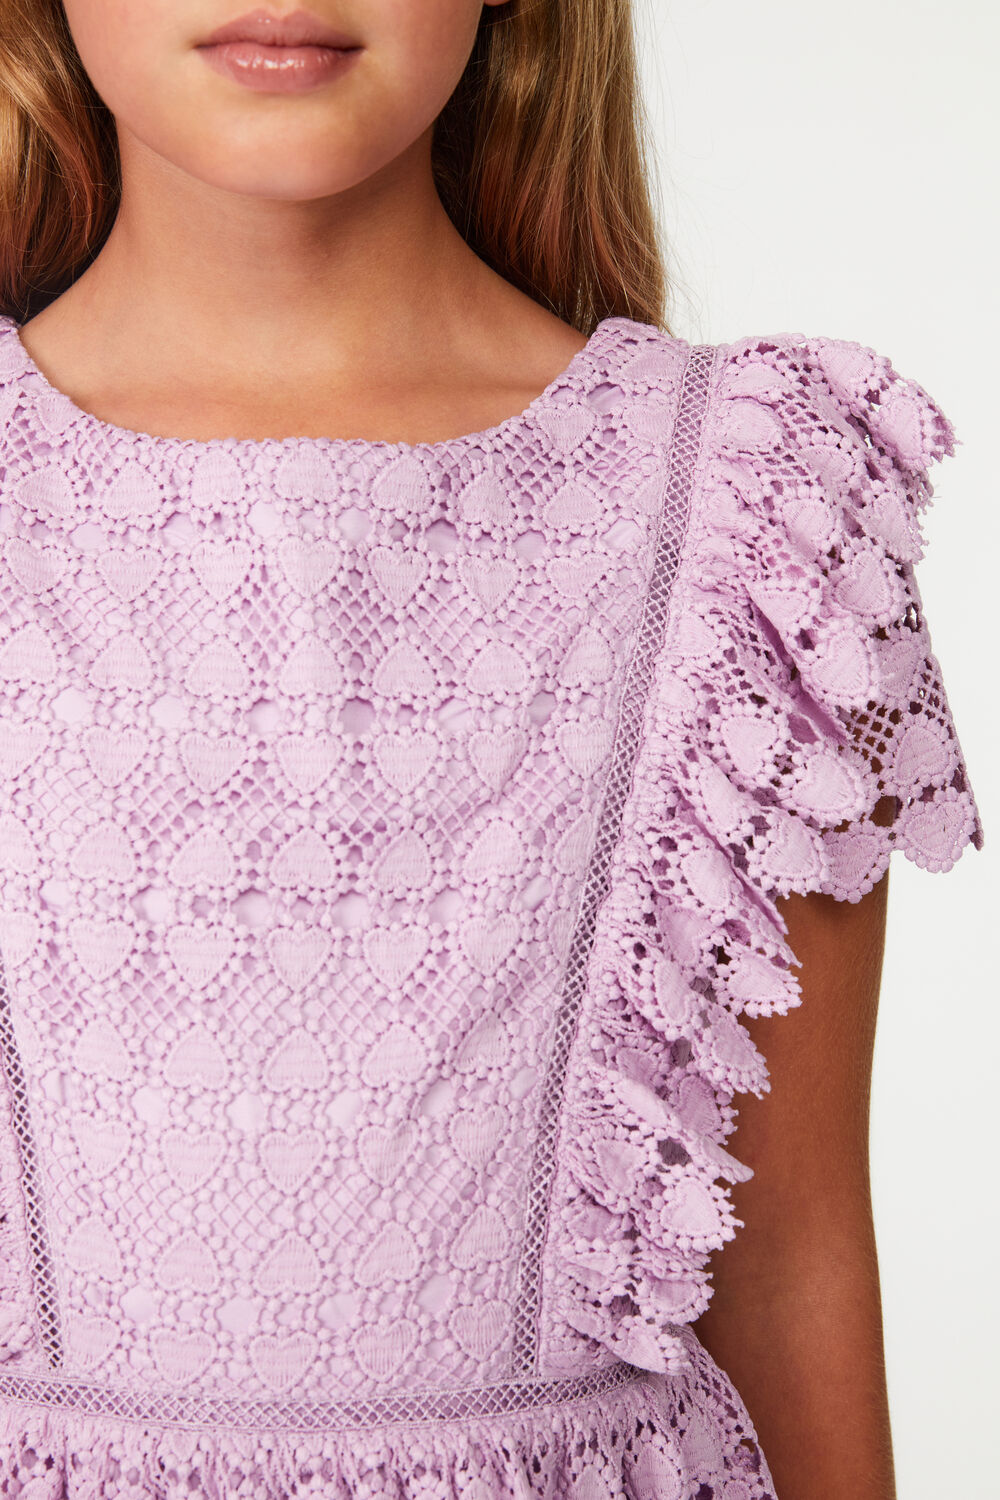 Girls HEART LACE DRESS in colour PETAL PINK